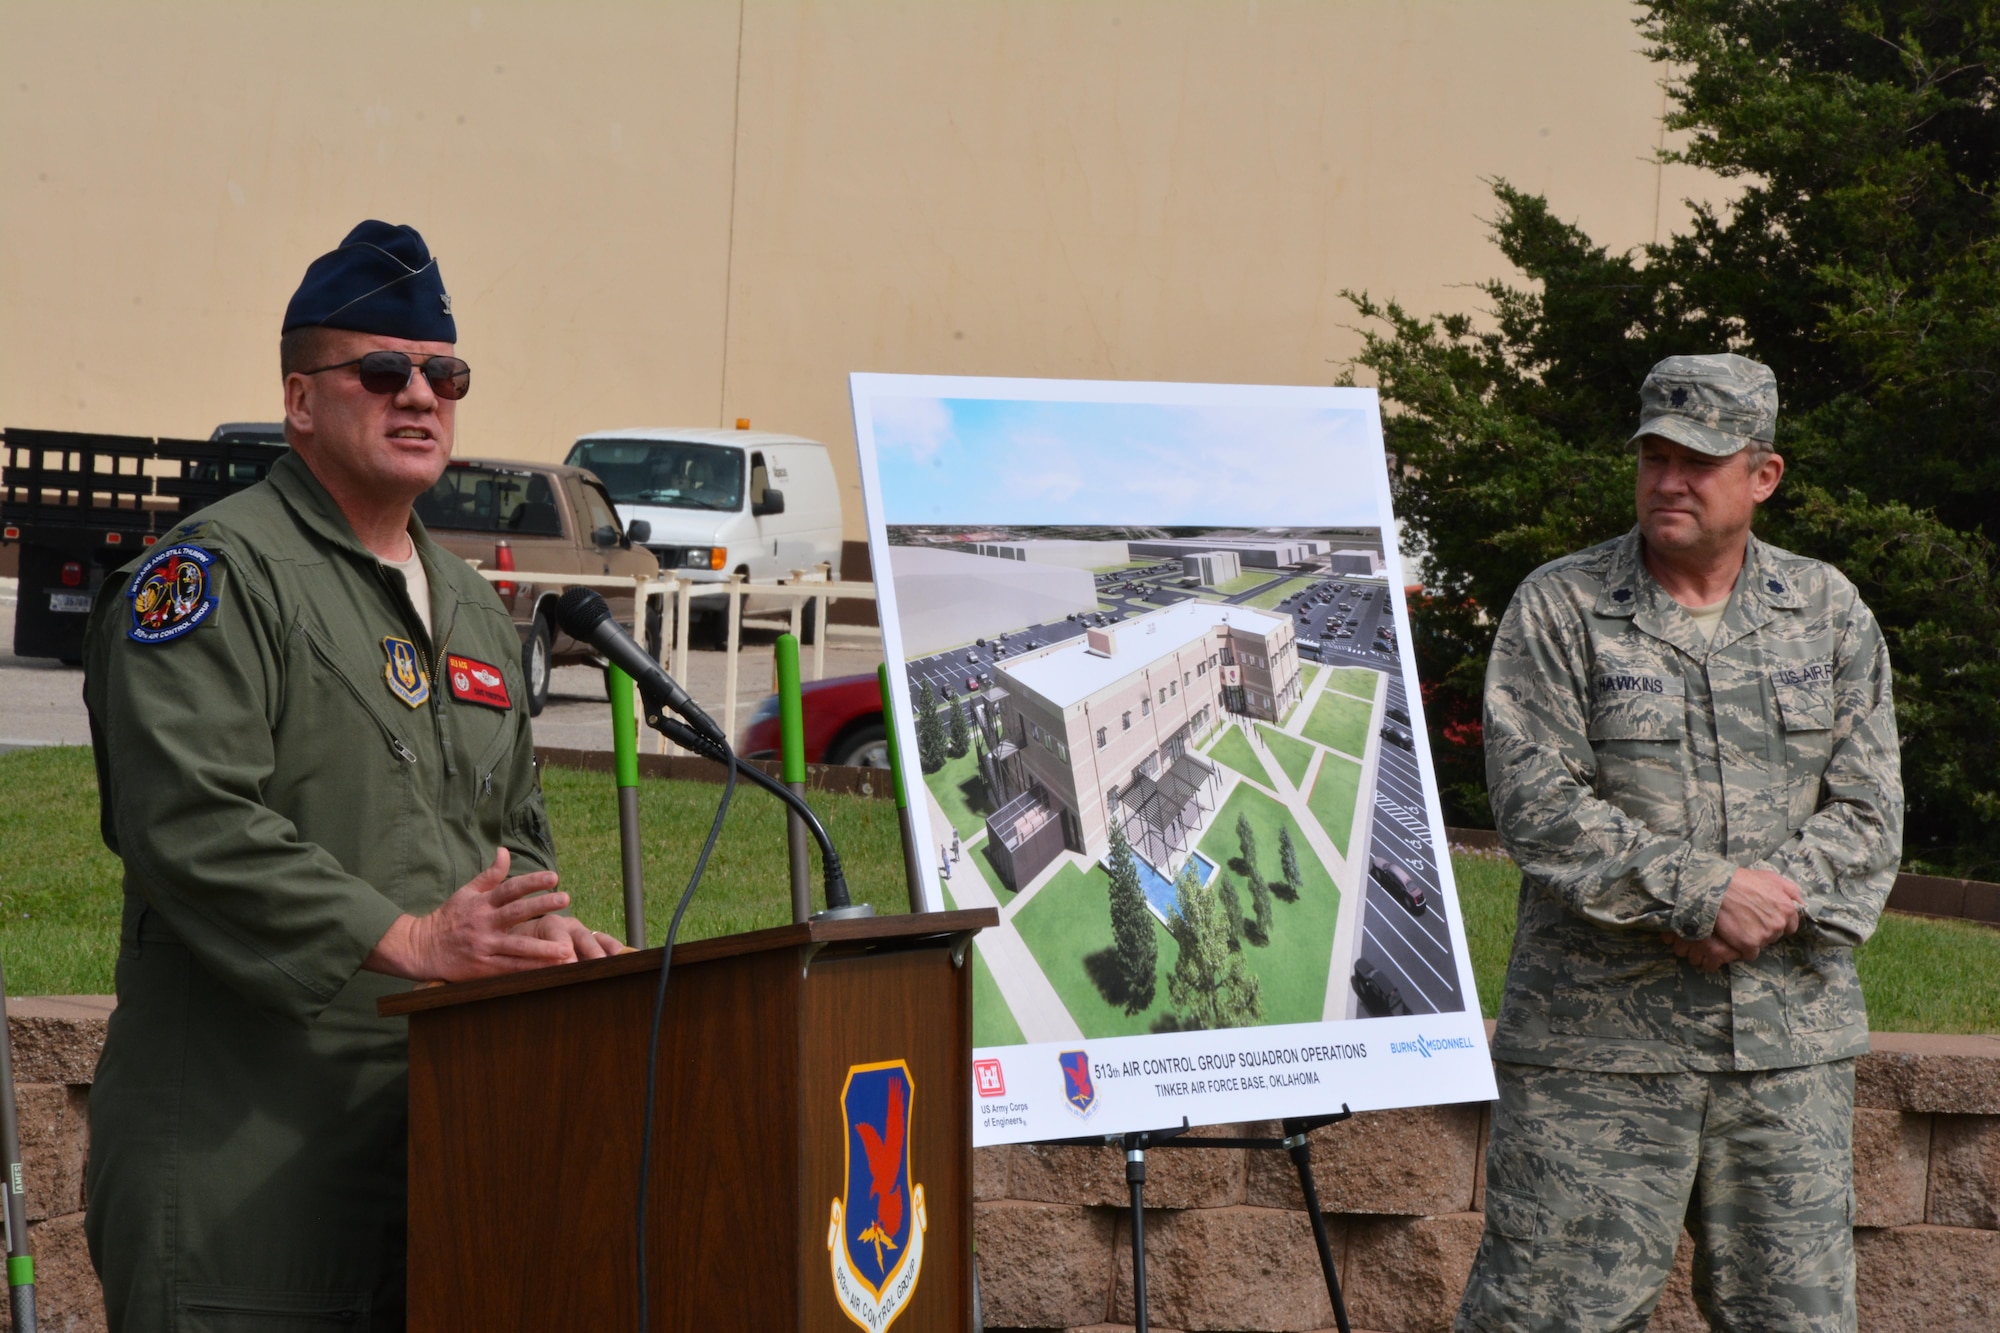 Col. David Robertson, commander of the 513th Air Control Group delivers a speech during the groundbreaking ceremony for the new operations facility April 14, 2016.  The 513th ACG is an associate Reserve unit, which augments the 552nd with crews and maintenance personnel for the E-3 Sentry, Airborne Warning and Control System, also known as AWACS. (U.S. Air Force photo/Maj. Jon Quinlan)